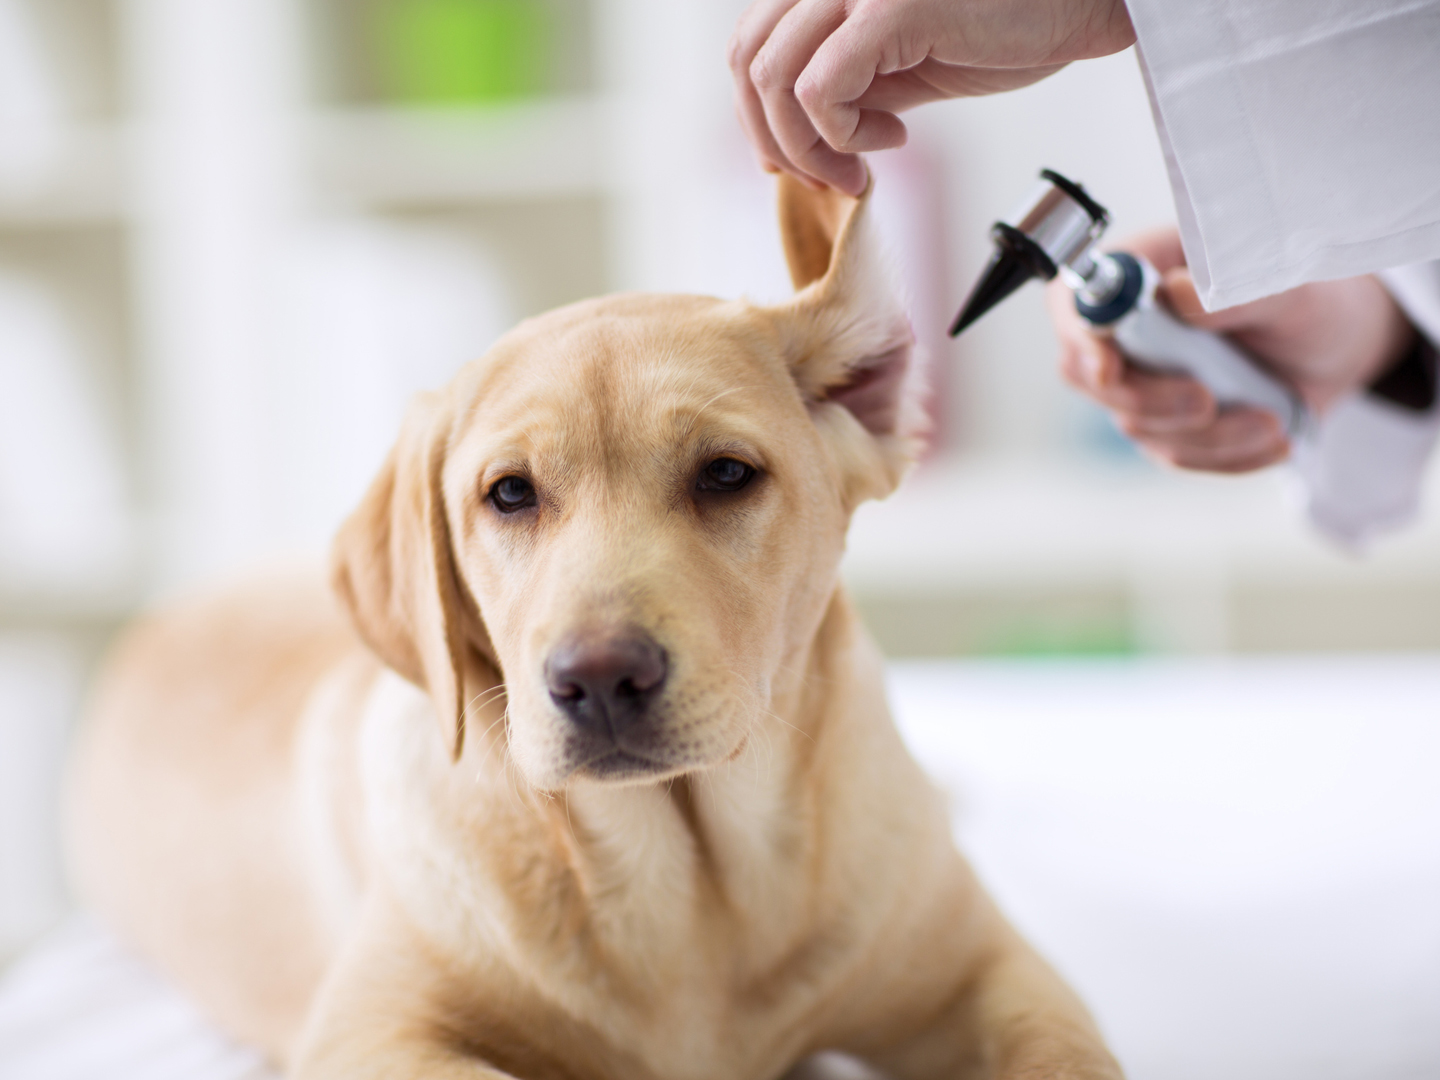 Are OTC Human Drugs Safe for Pets? - Ask Dr. Weil